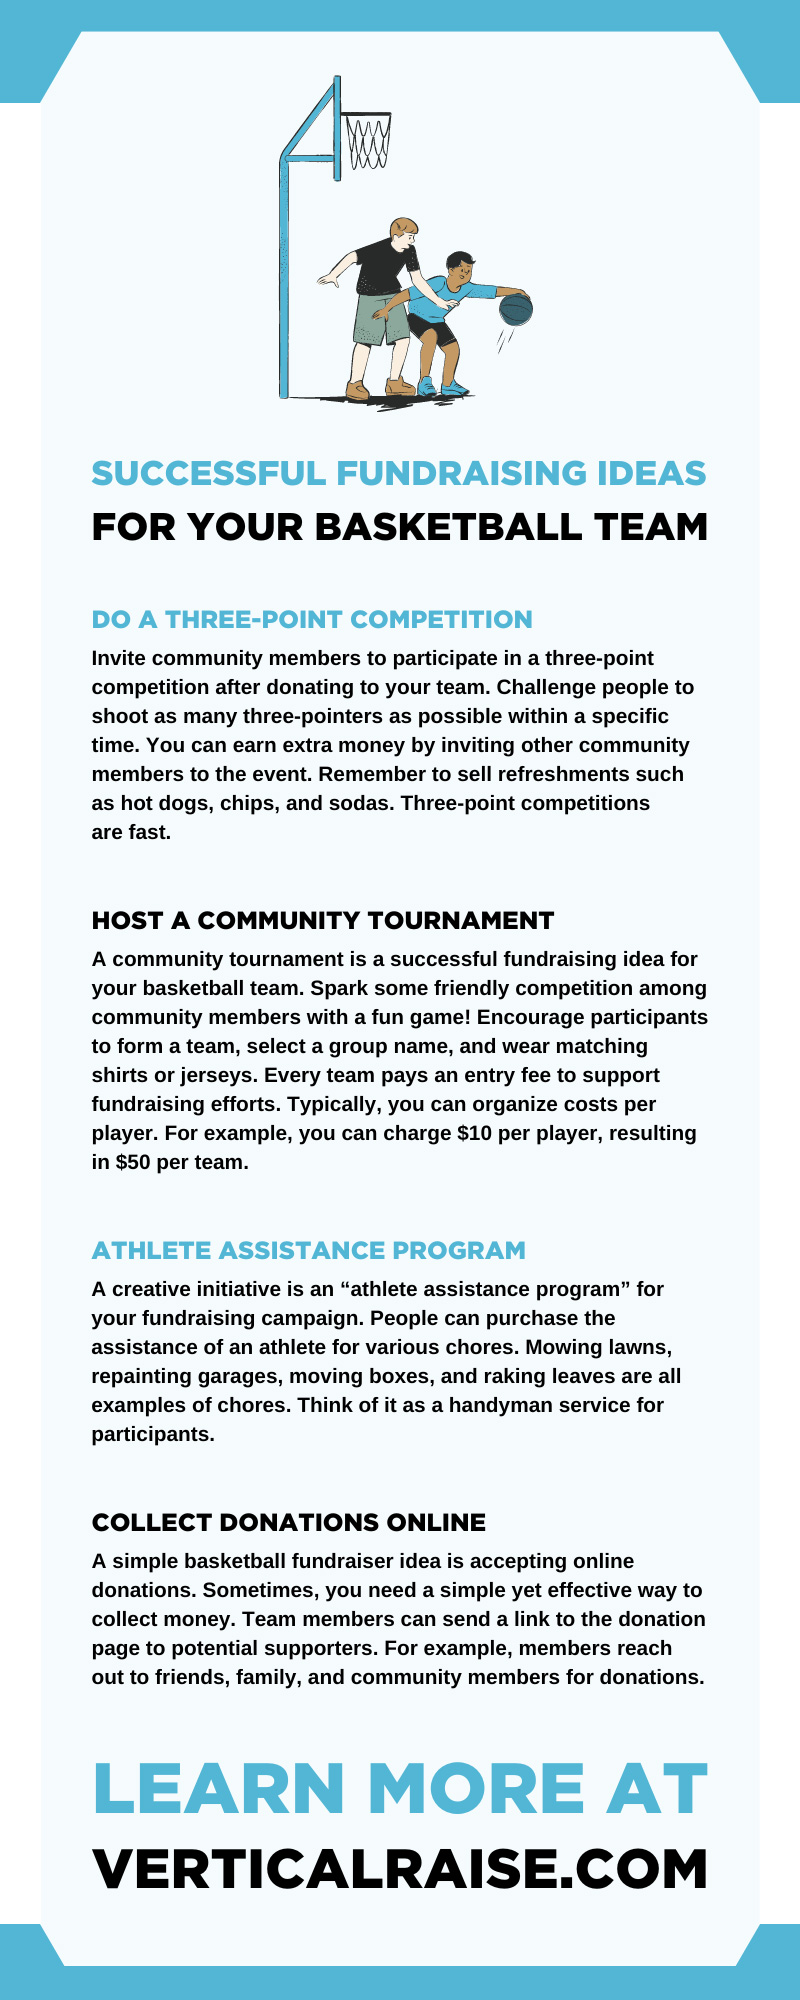 Successful Fundraising Ideas for Your Basketball Team